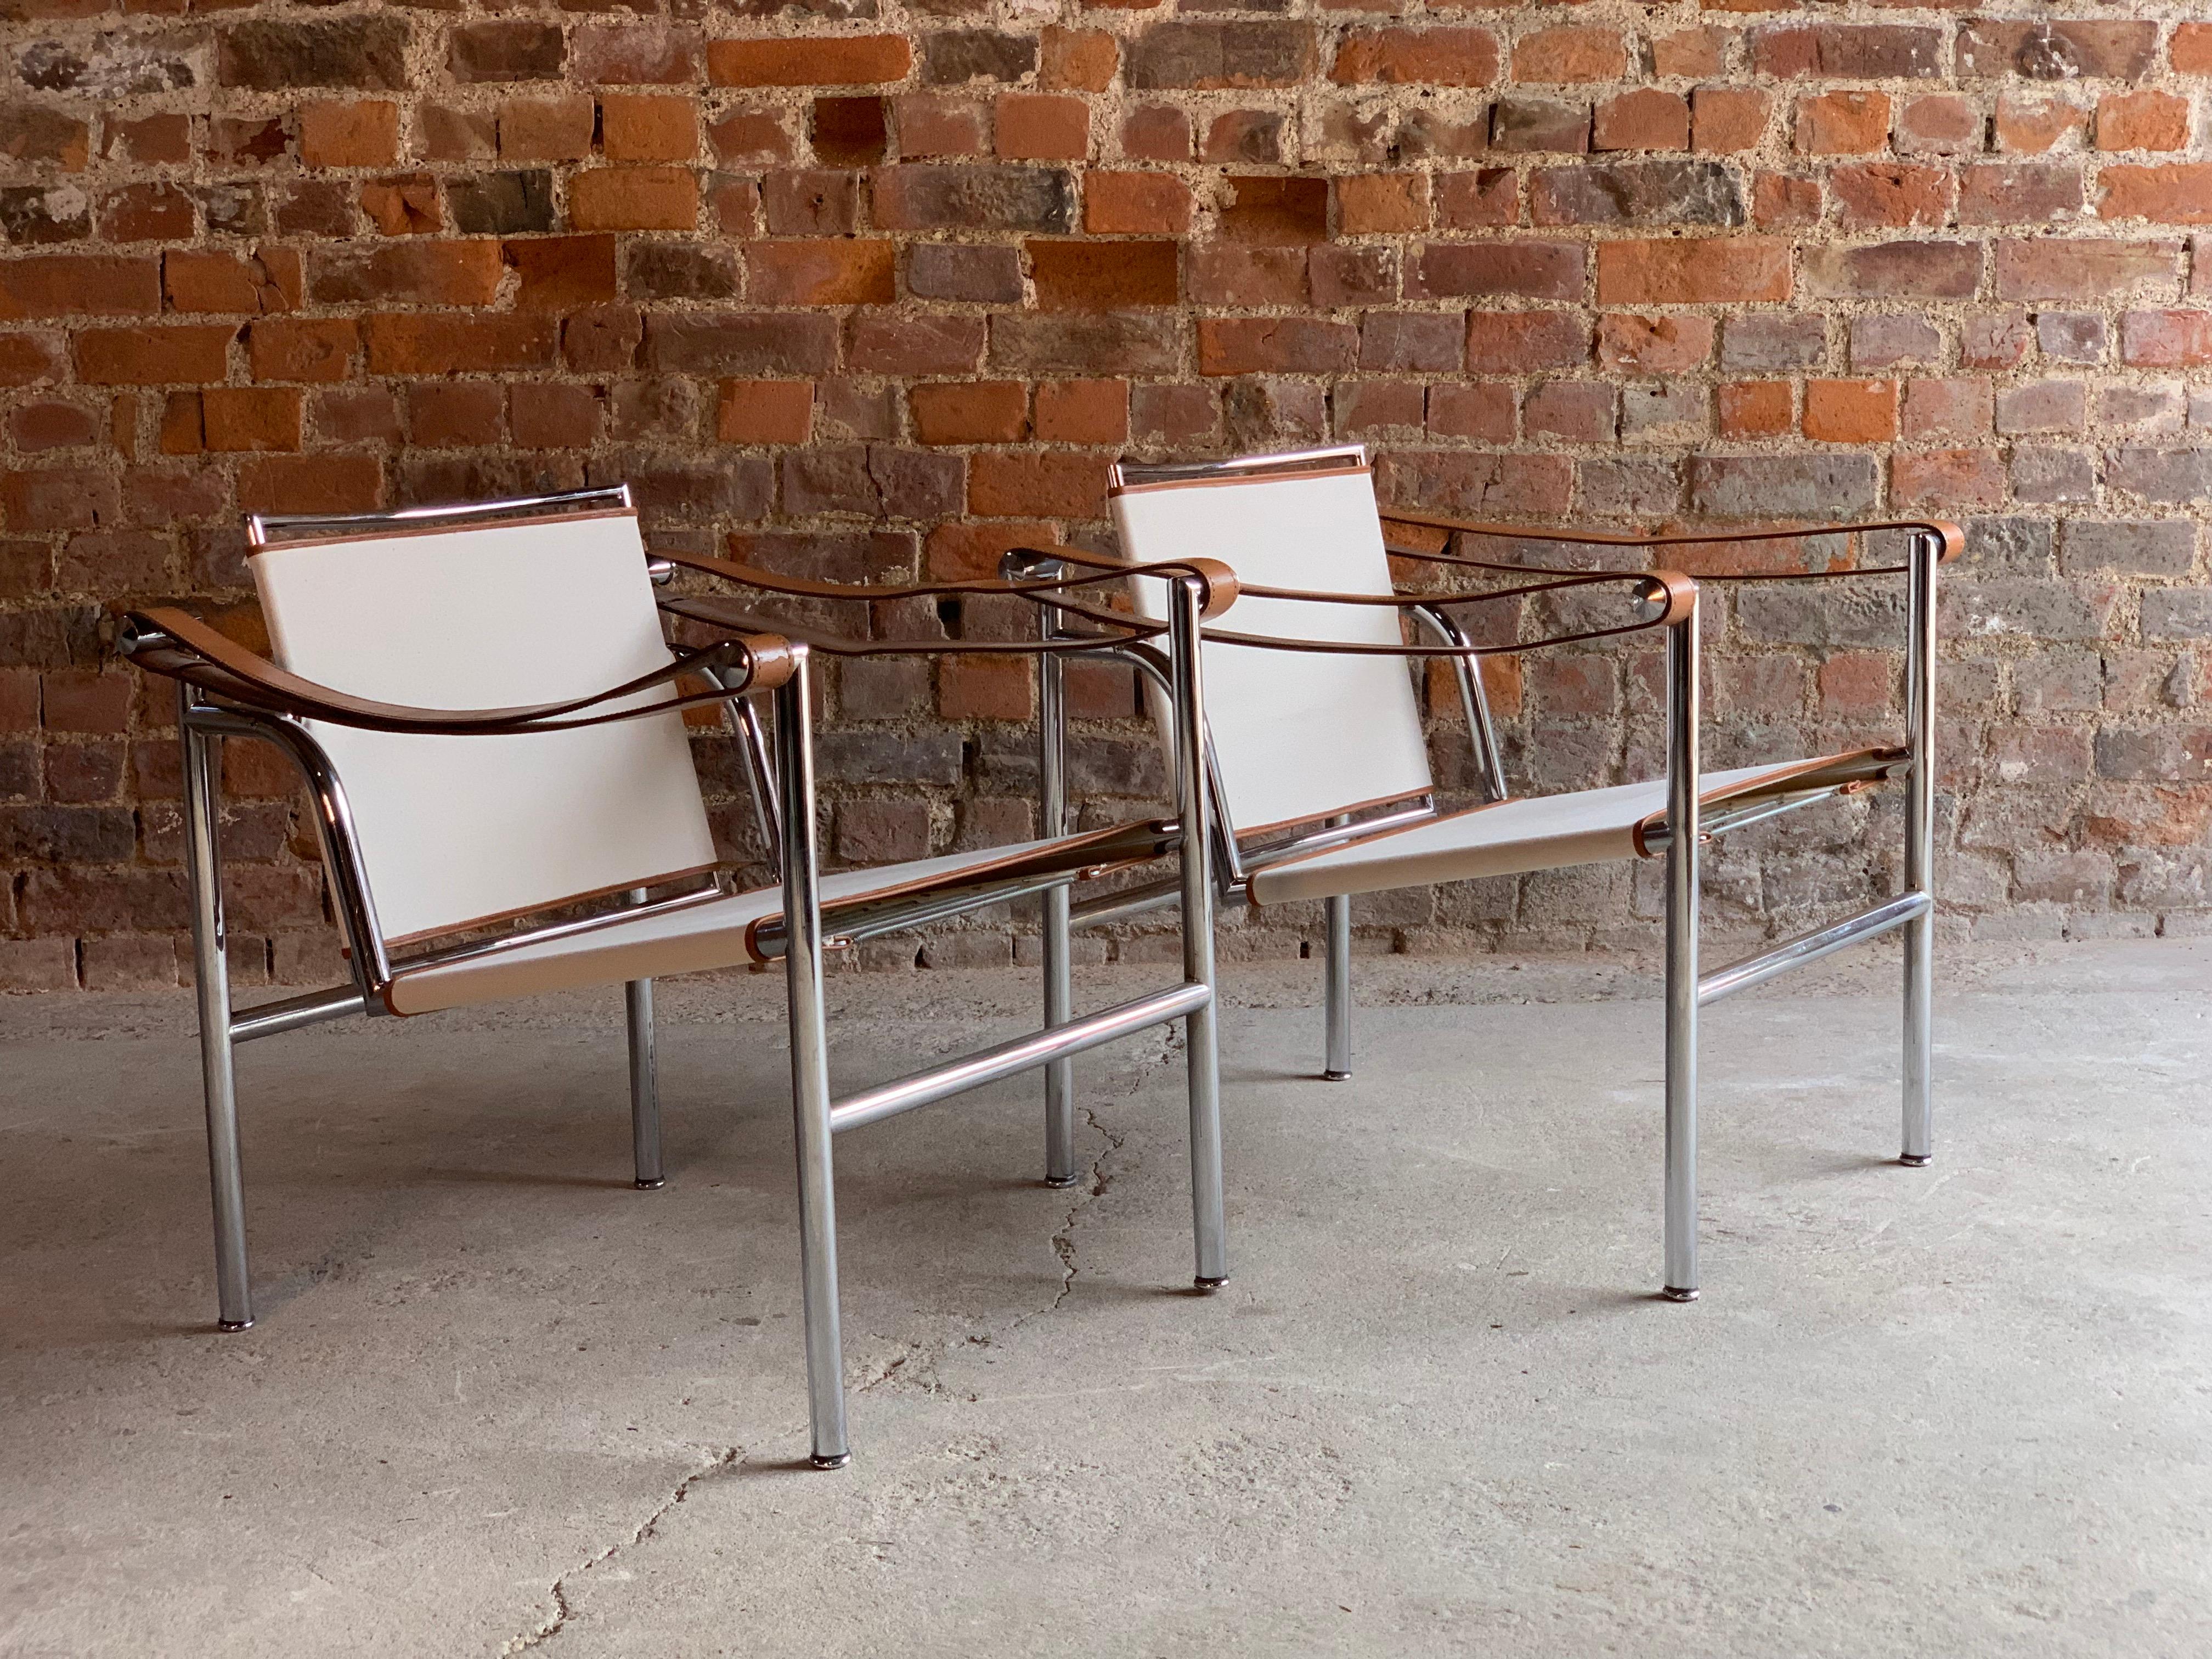 Le Corbusier LC1 Basculant chairs charlotte Perriand and Pierre Jeanneret Cassina, circa 1970

Stunning pair of original LC1 Basculant armchairs by Le Corbusier, Pierre Jeanneret, & Charlotte Perriand Italy, circa 1970, on chrome tubular frames